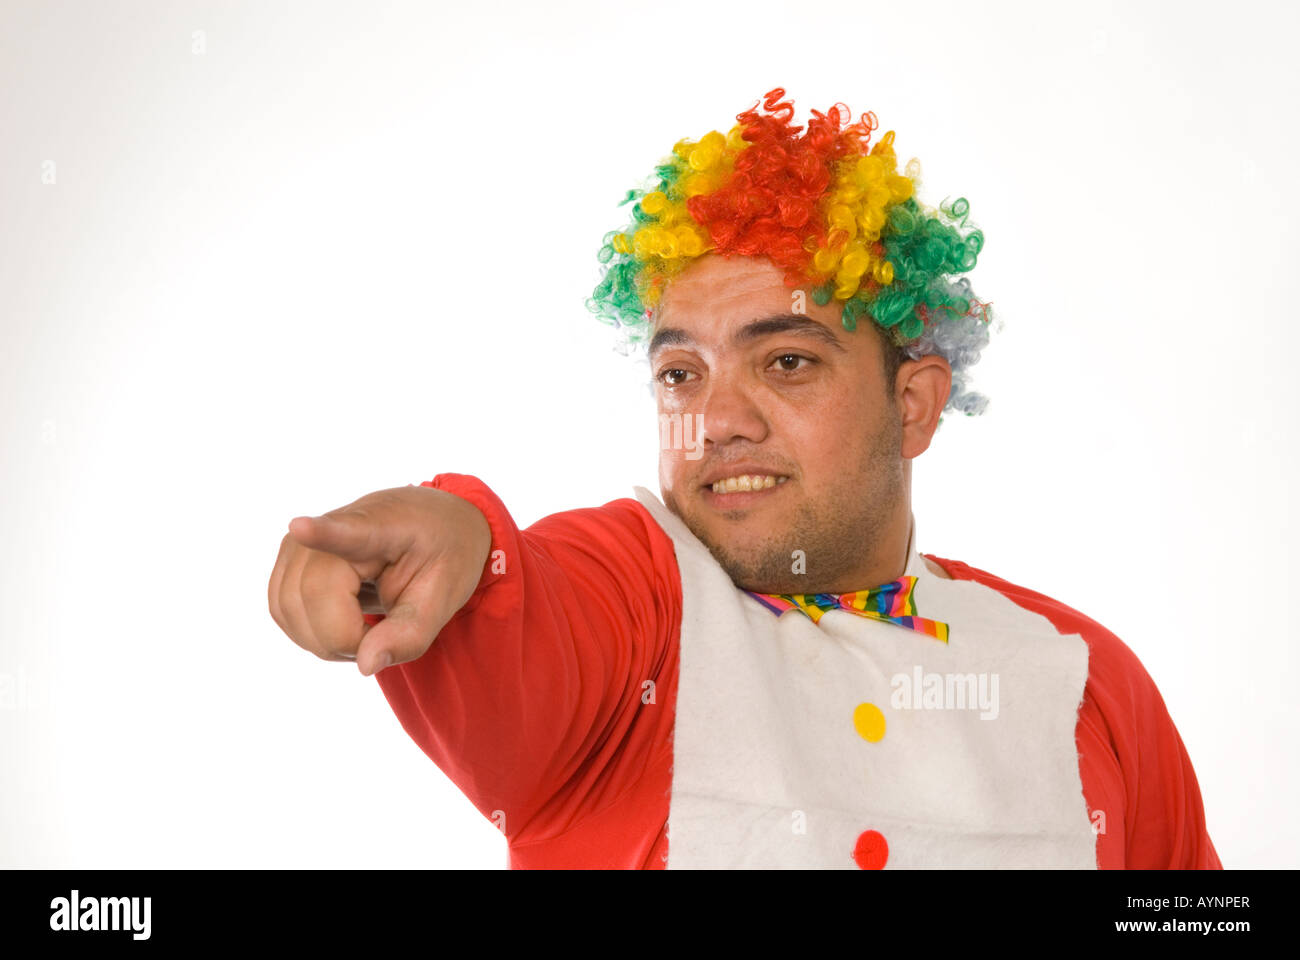 Head and shoulders portrait of a midget clown pointing finger against a white background Stock Photo